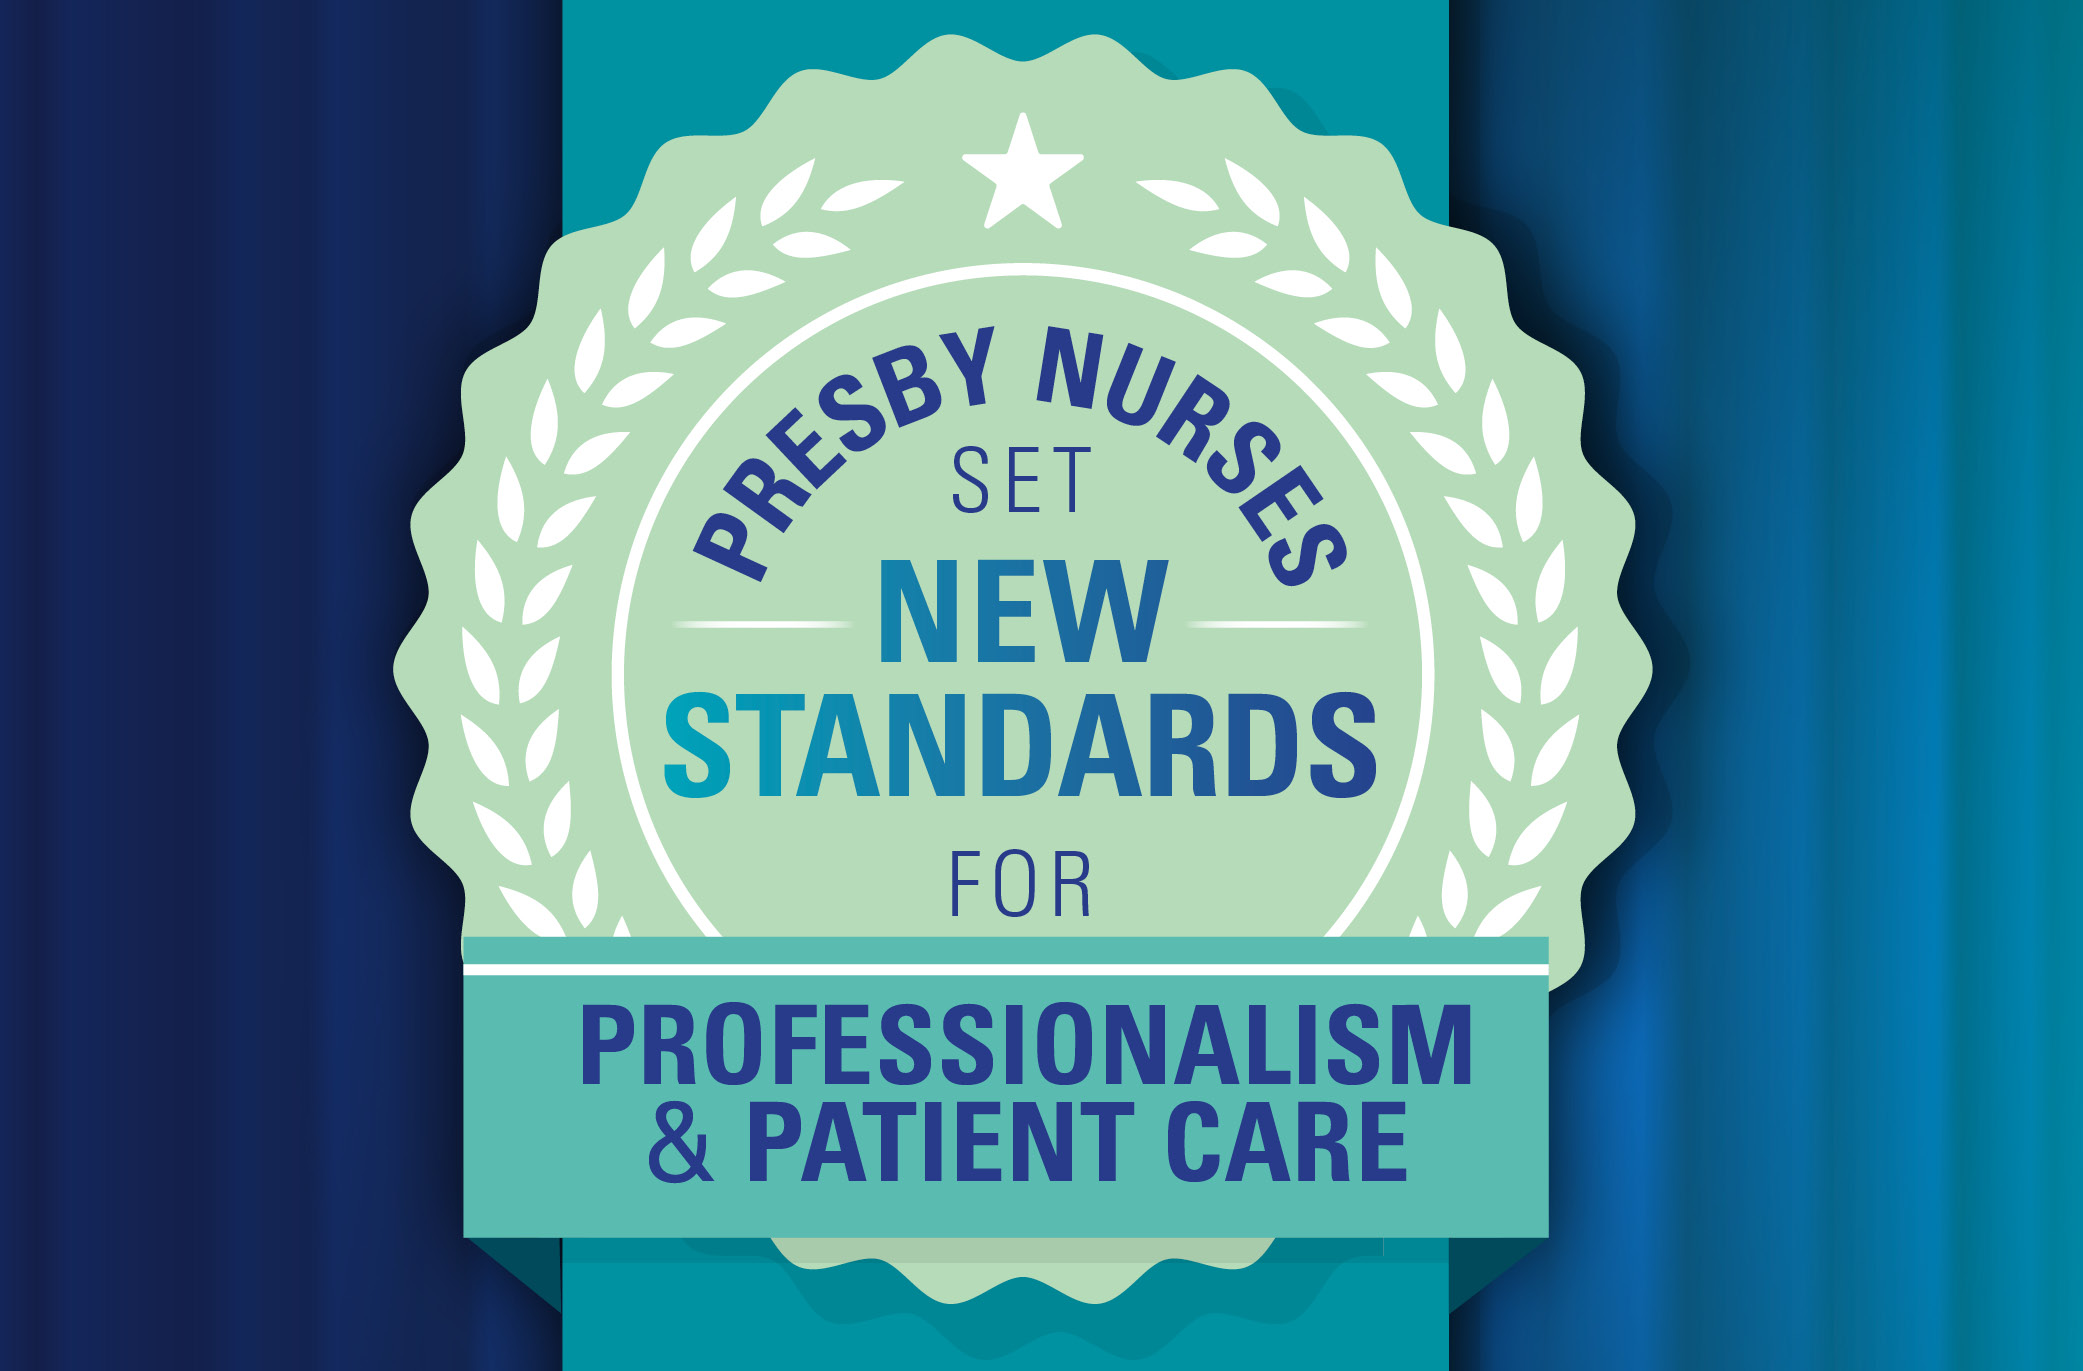 Presby Nurses Set New Standards for Professionalism and Patient Care